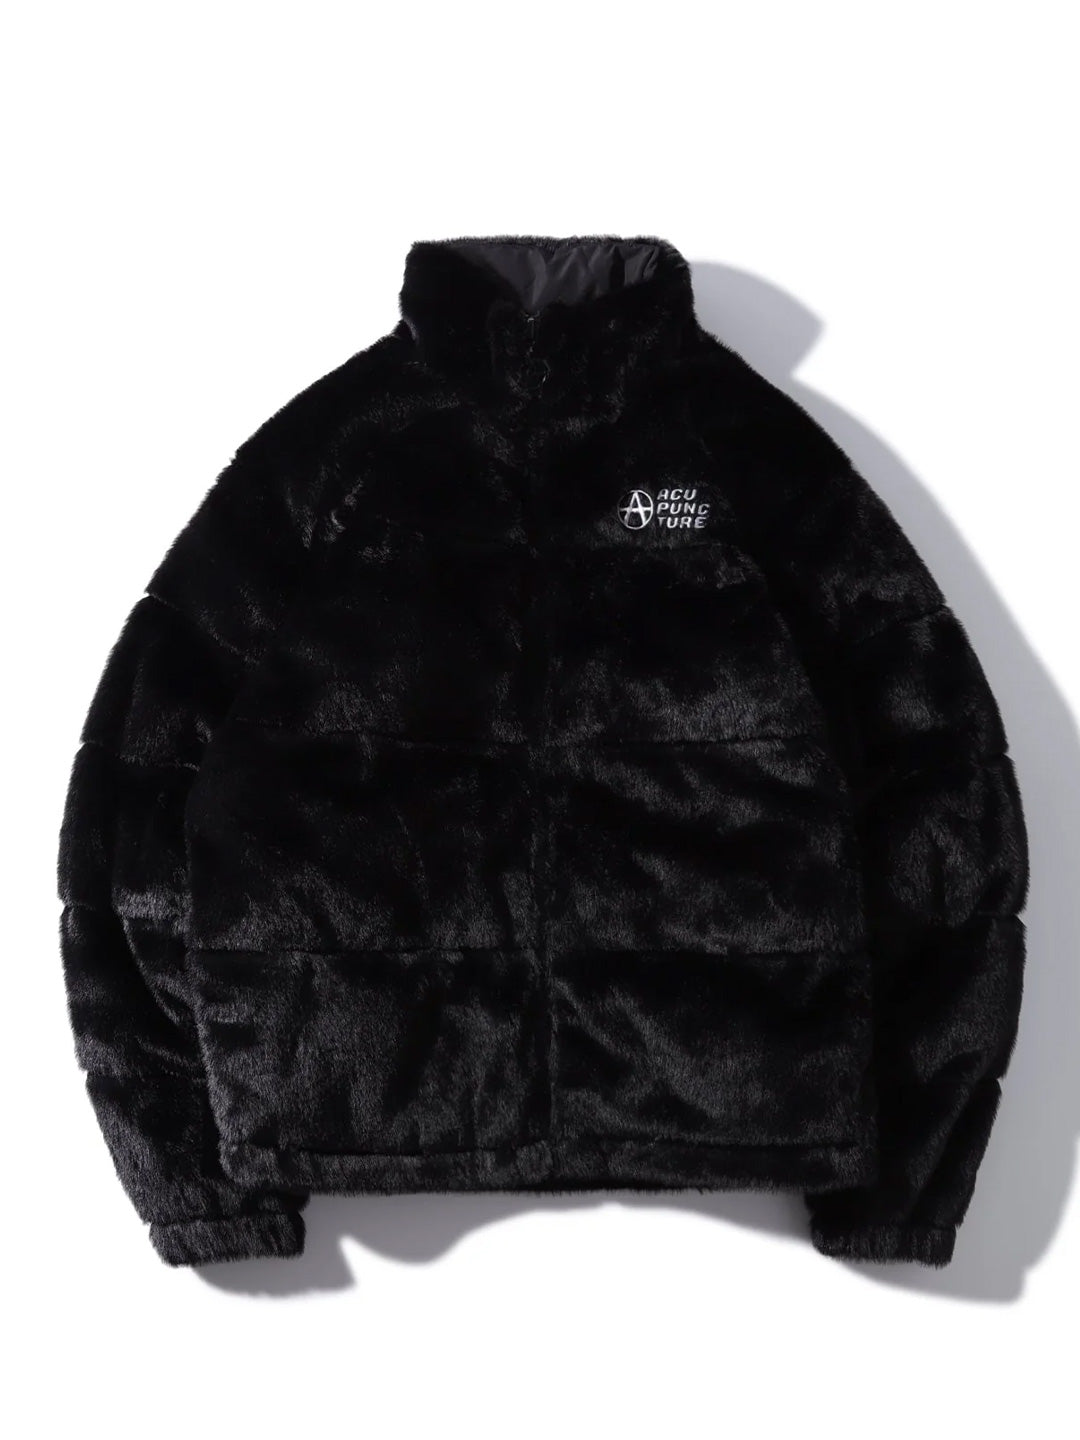 Acupuncture black jacket with fur